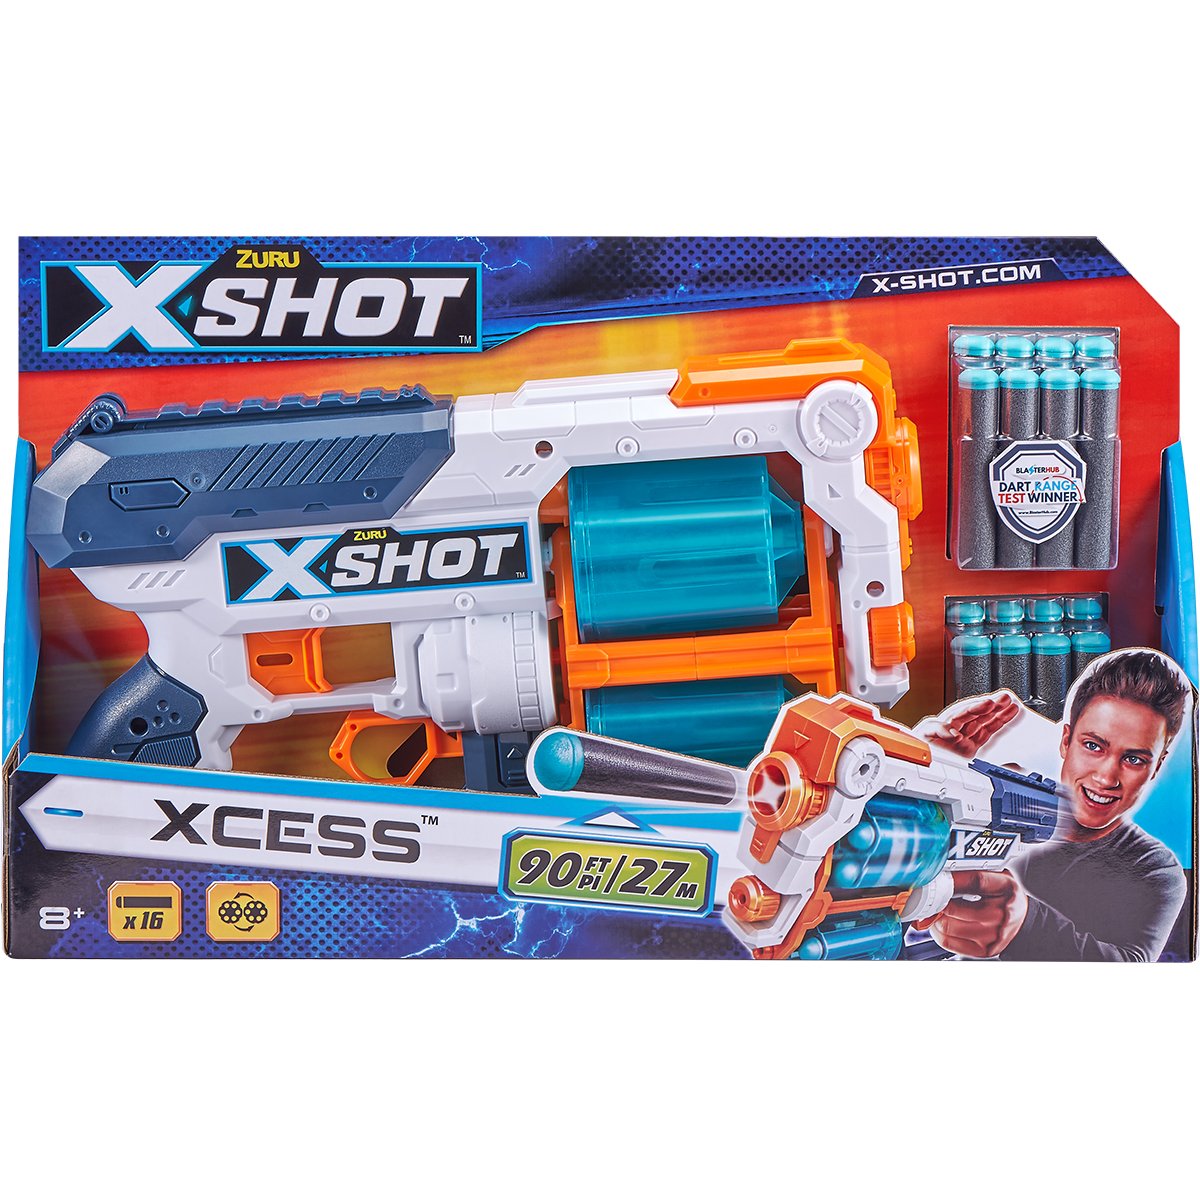 Blaster X-Shot Excel Excess TK 12, 16 proiectile Jocuri in aer liber 2023-09-28 3